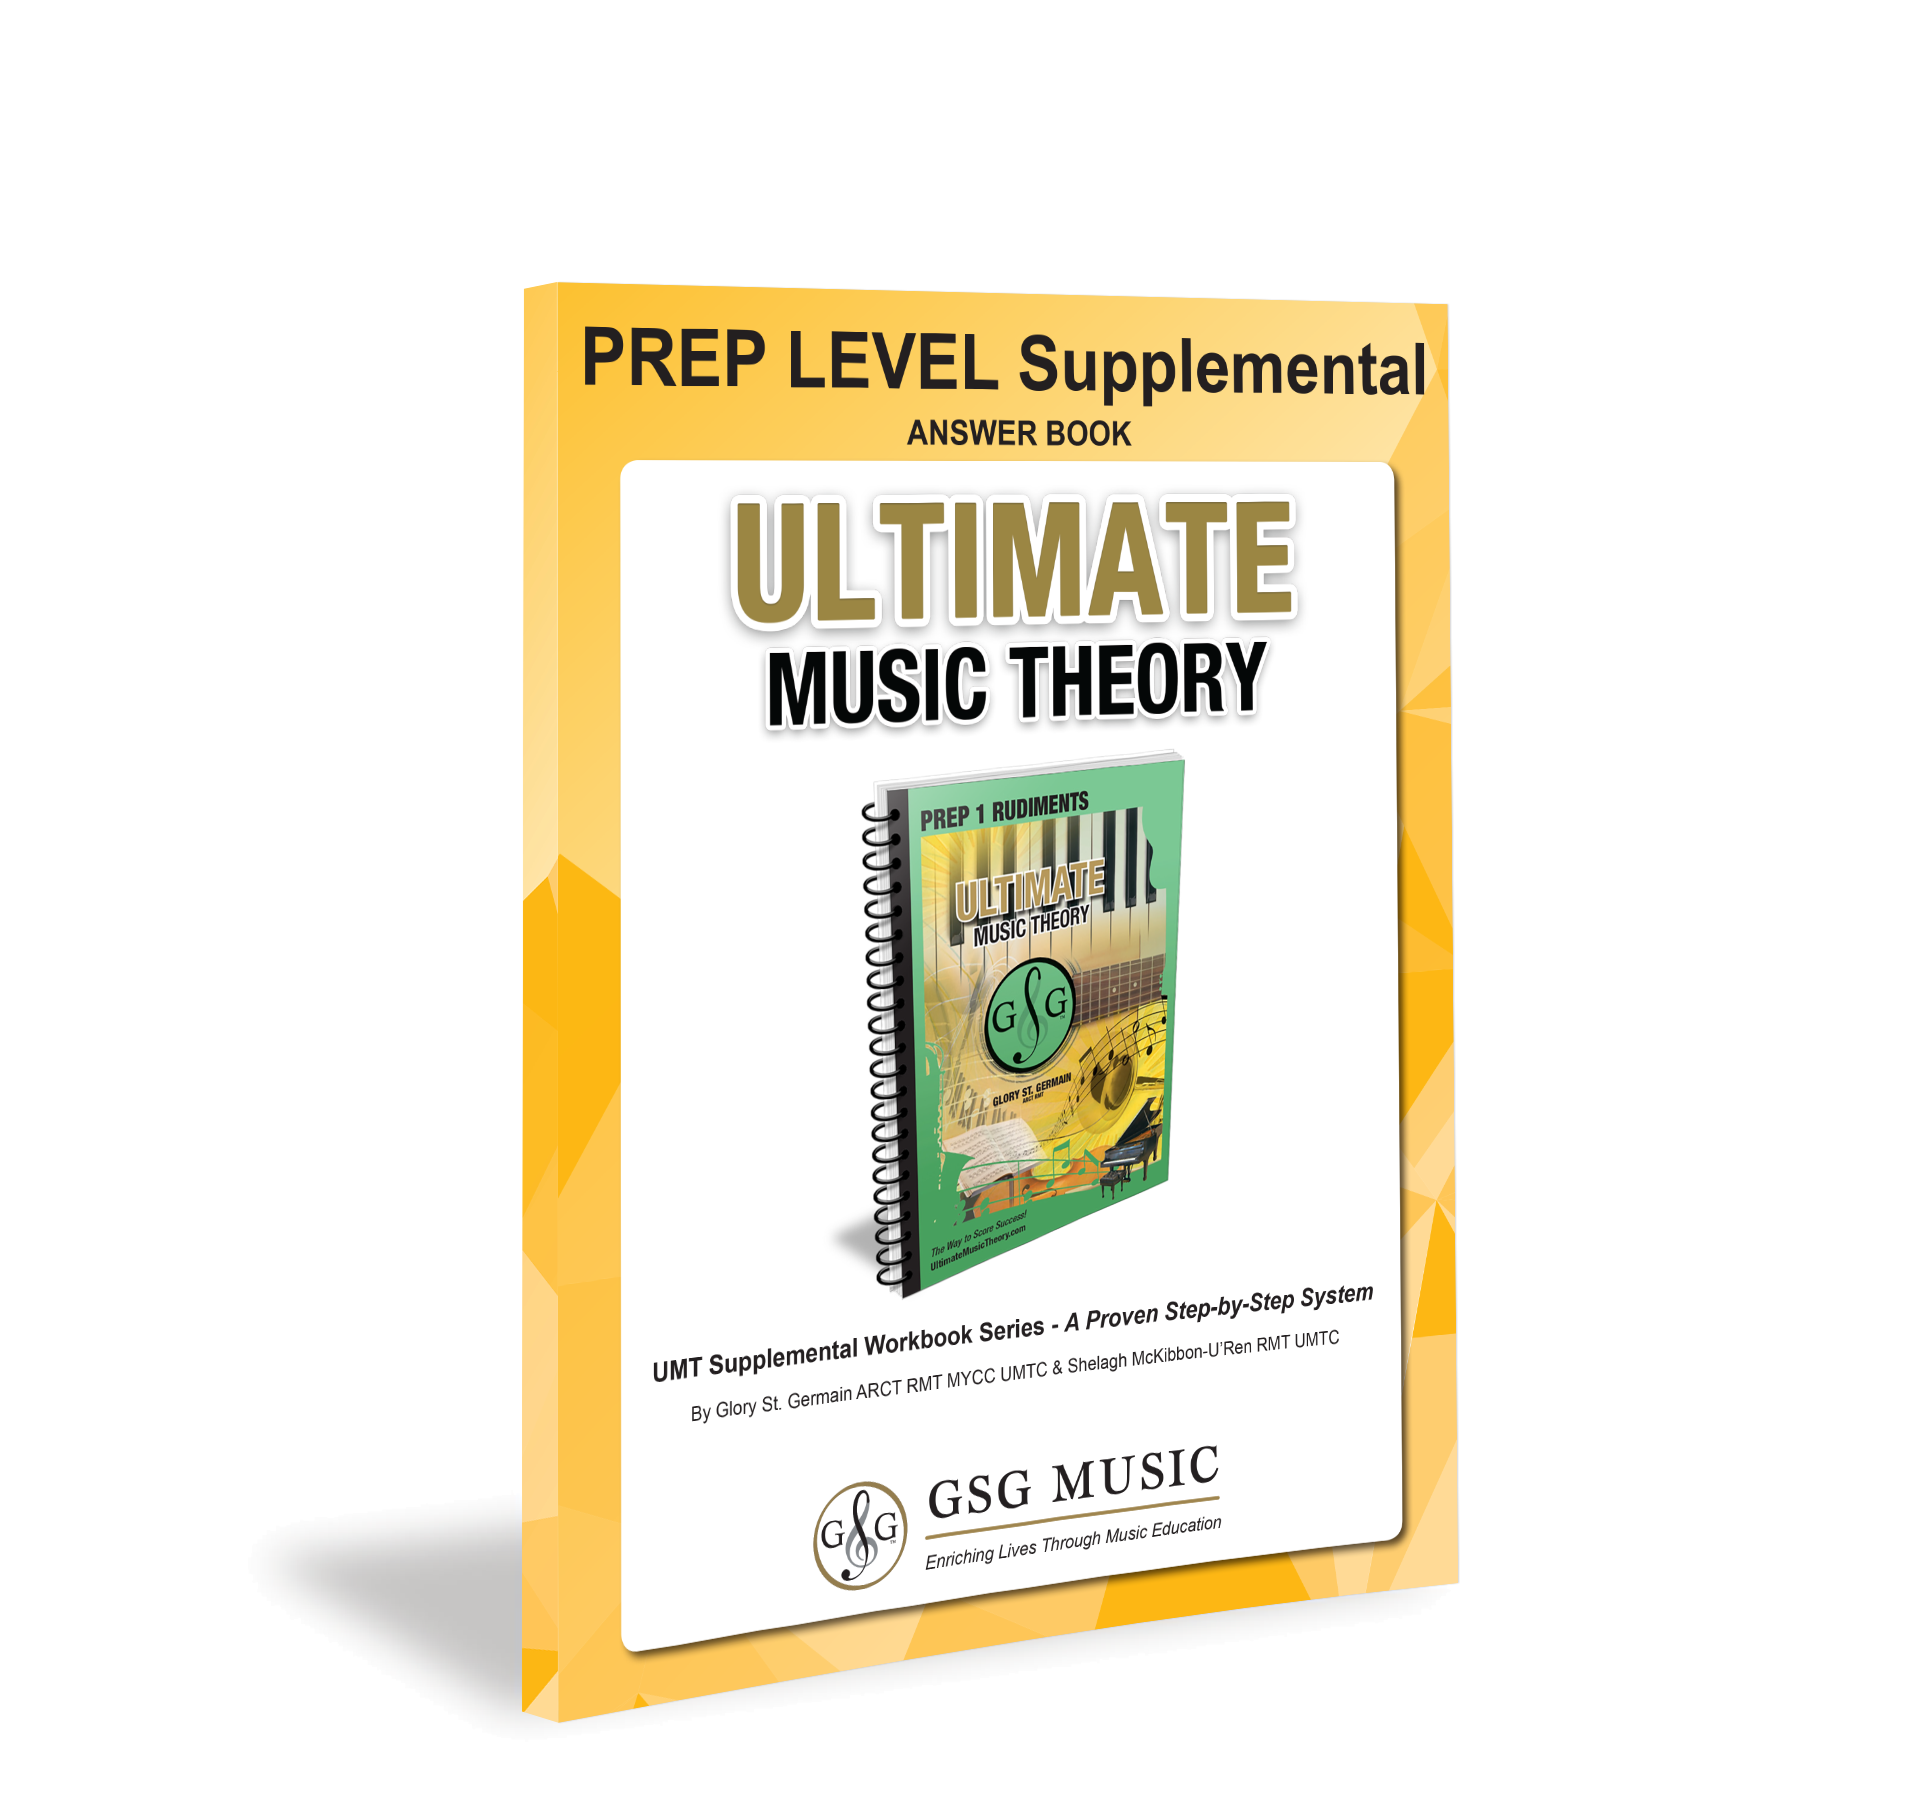 PREP LEVEL Supplemental Answers Download